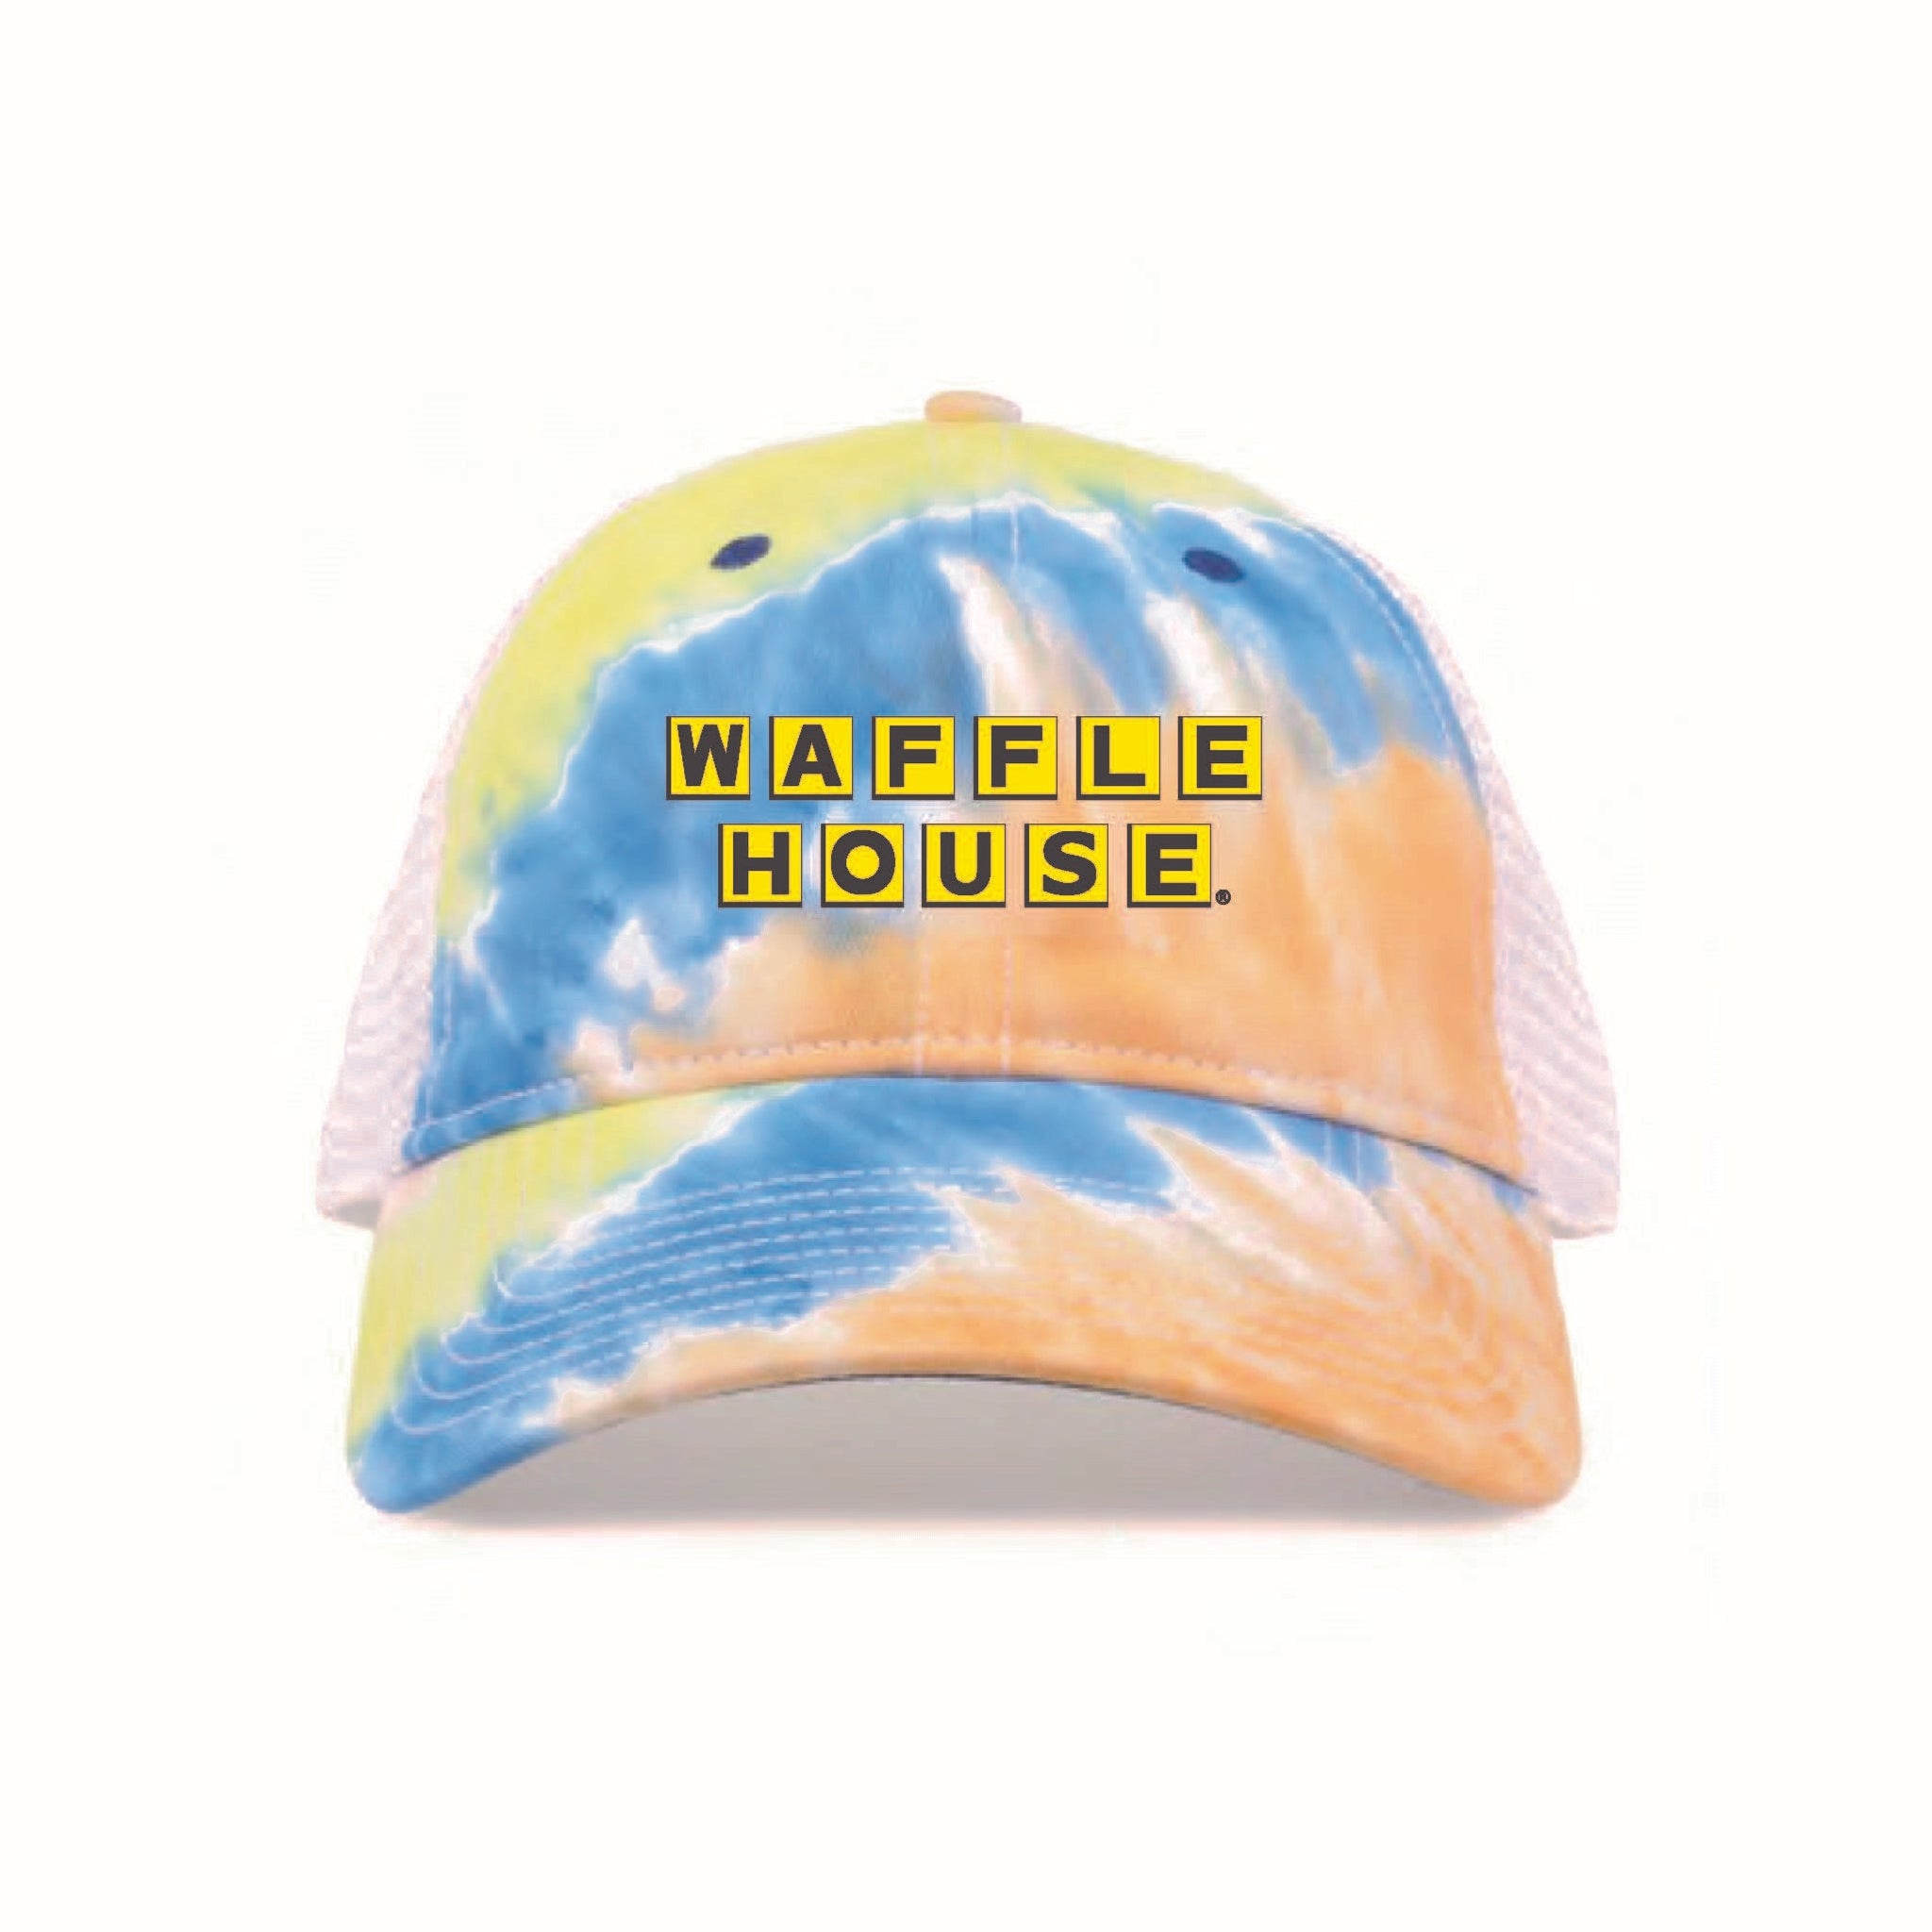 Pastel Tie-Dye trucker cap with white mesh back and Waffle House logo